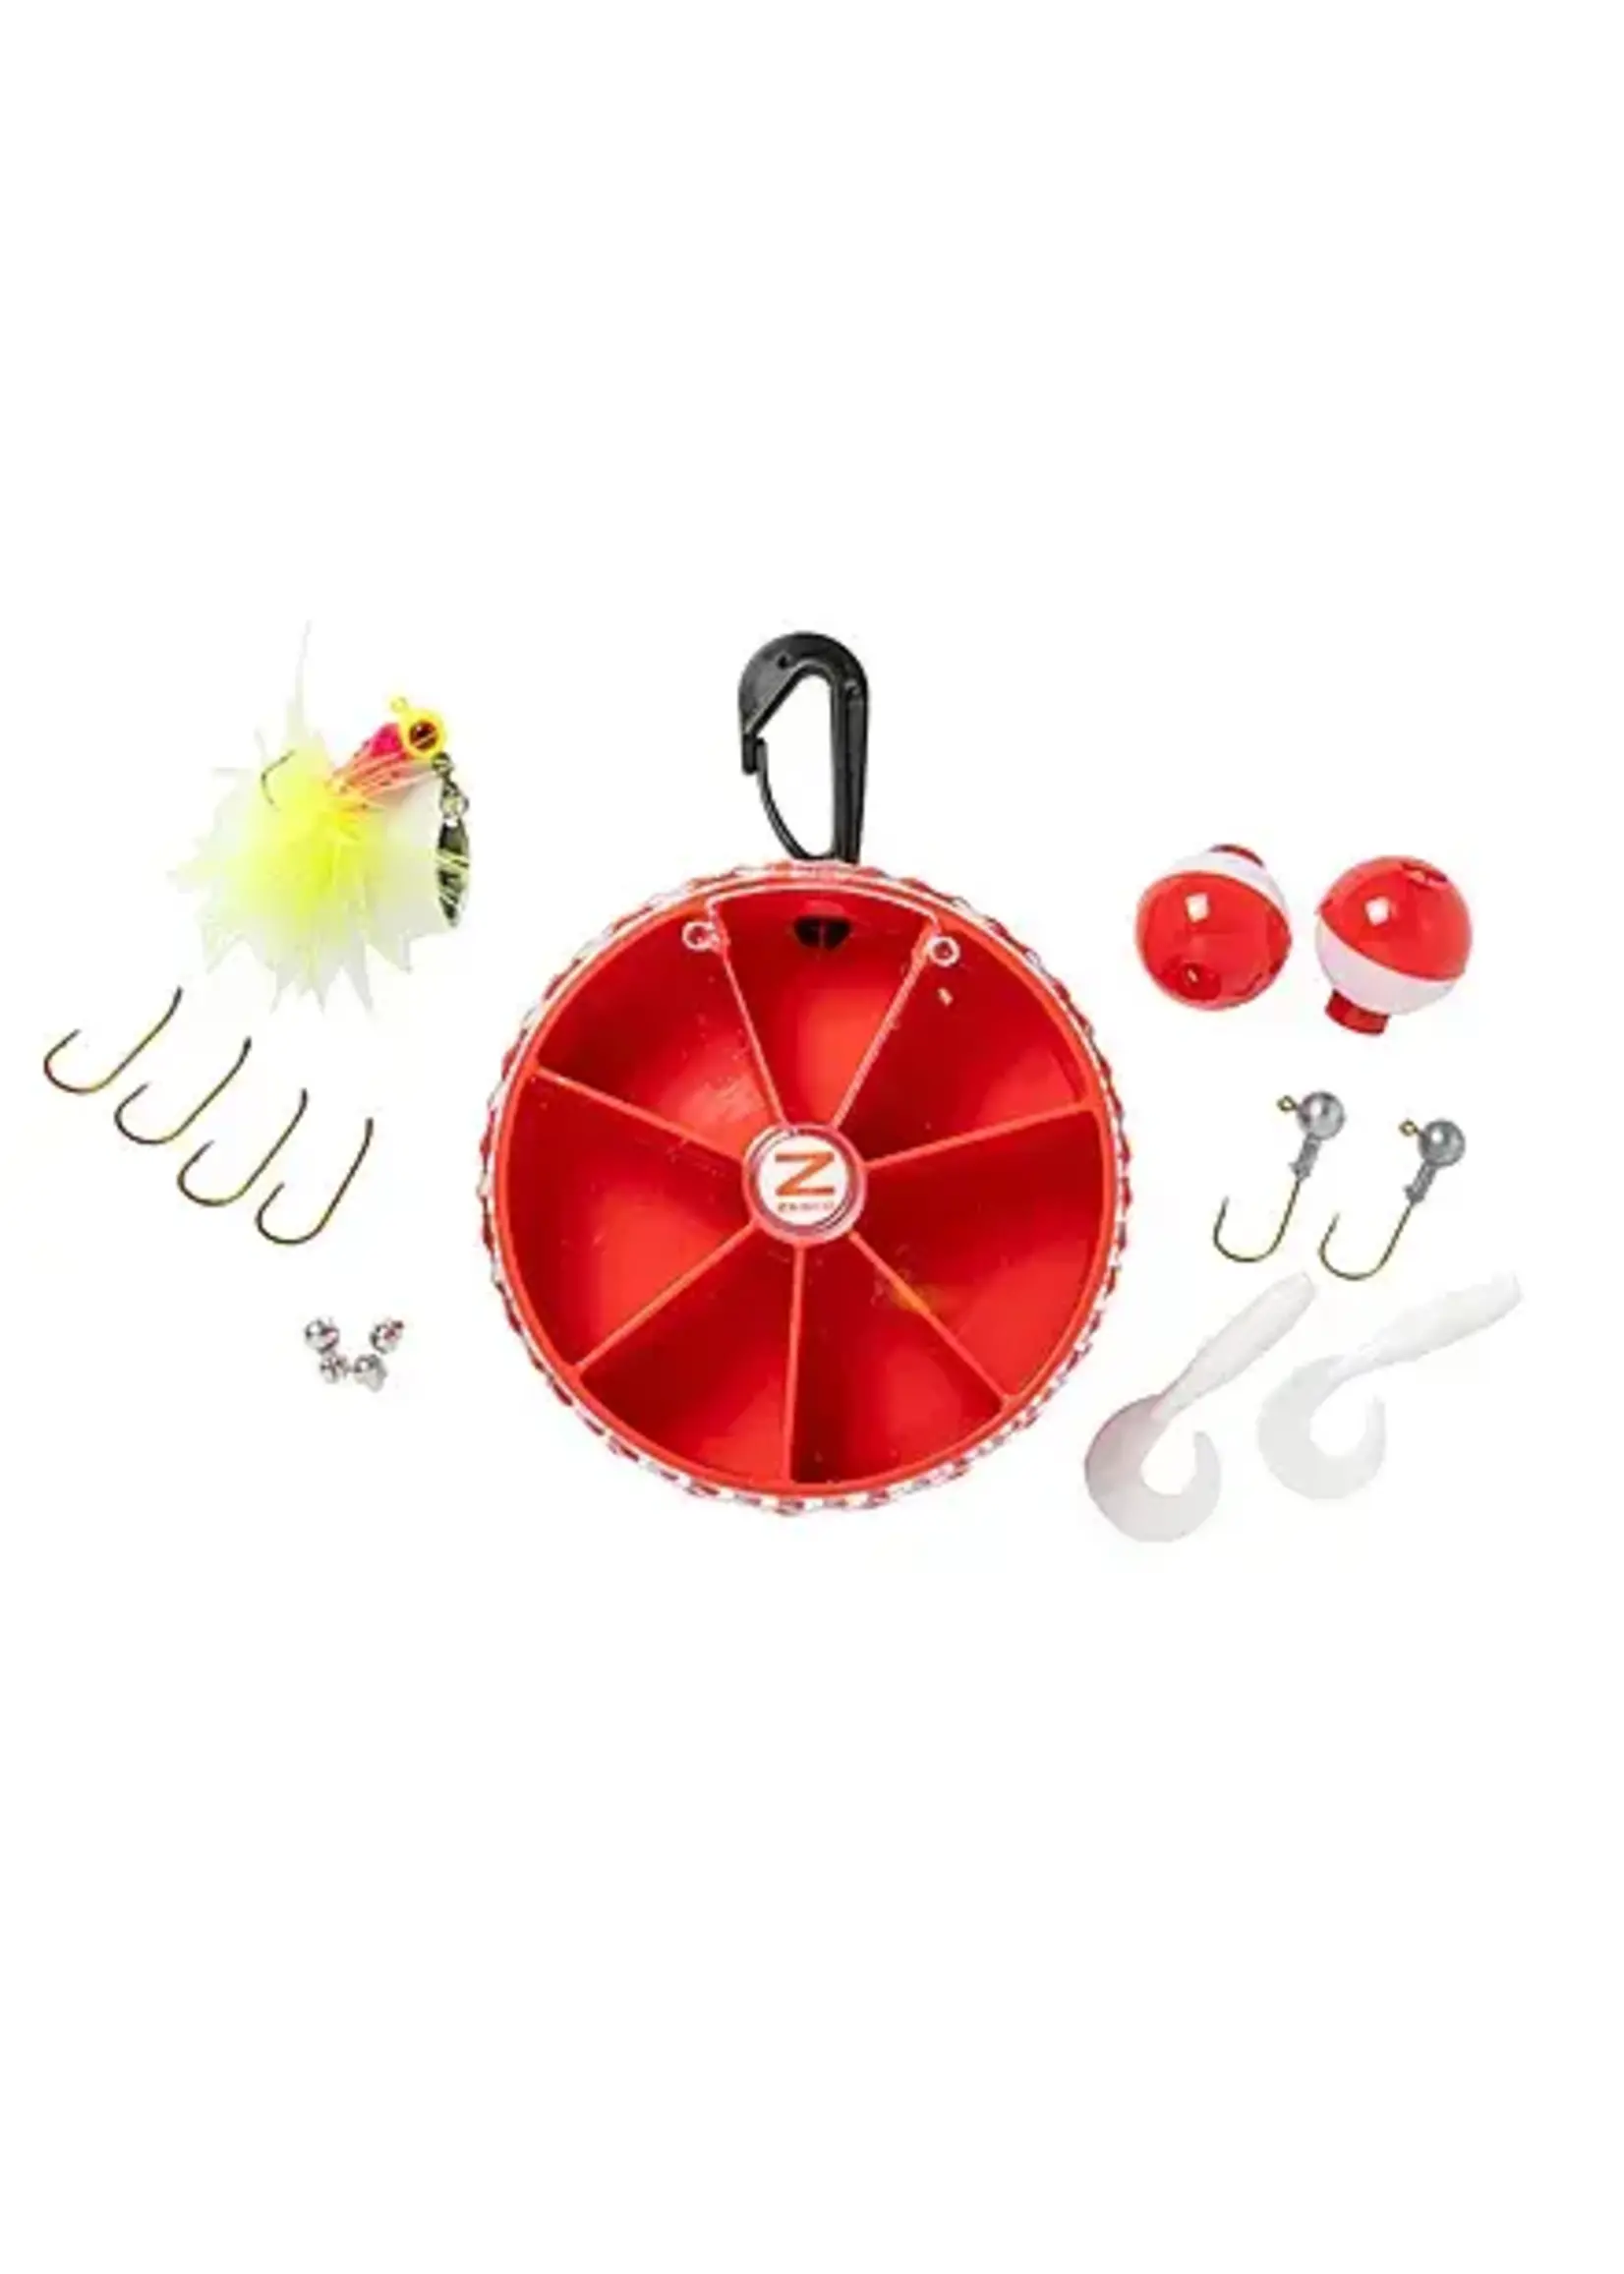 Zebco Zebco Crappie/Panfish Dial Pack